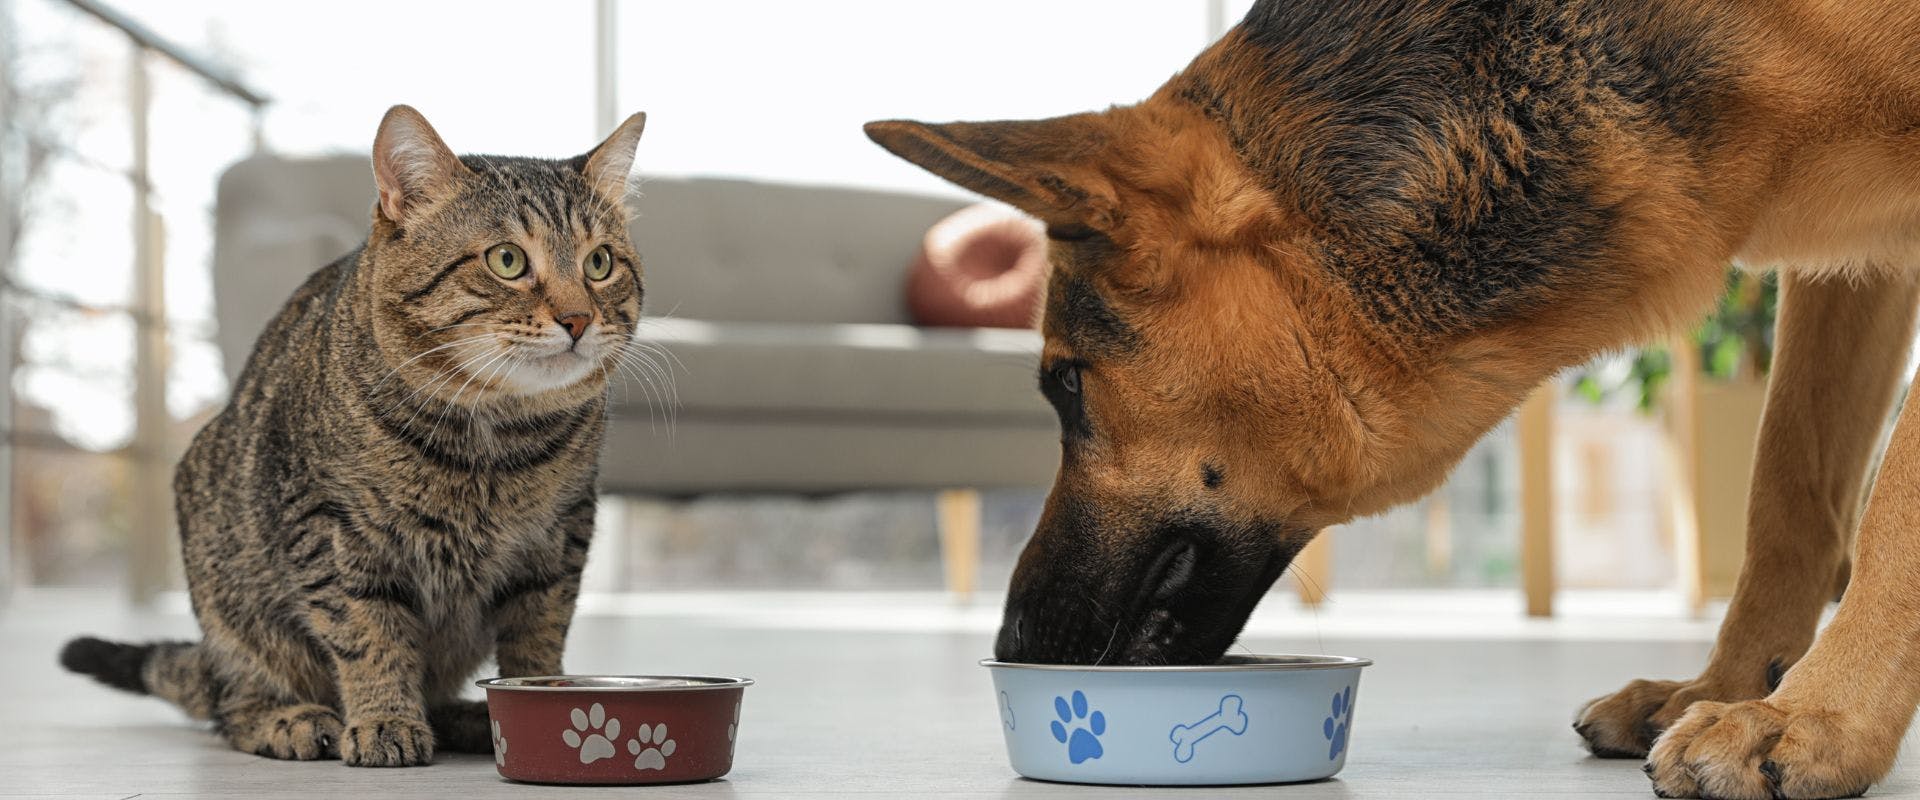 Tabby cat and dog eating from bowl on floor indoors